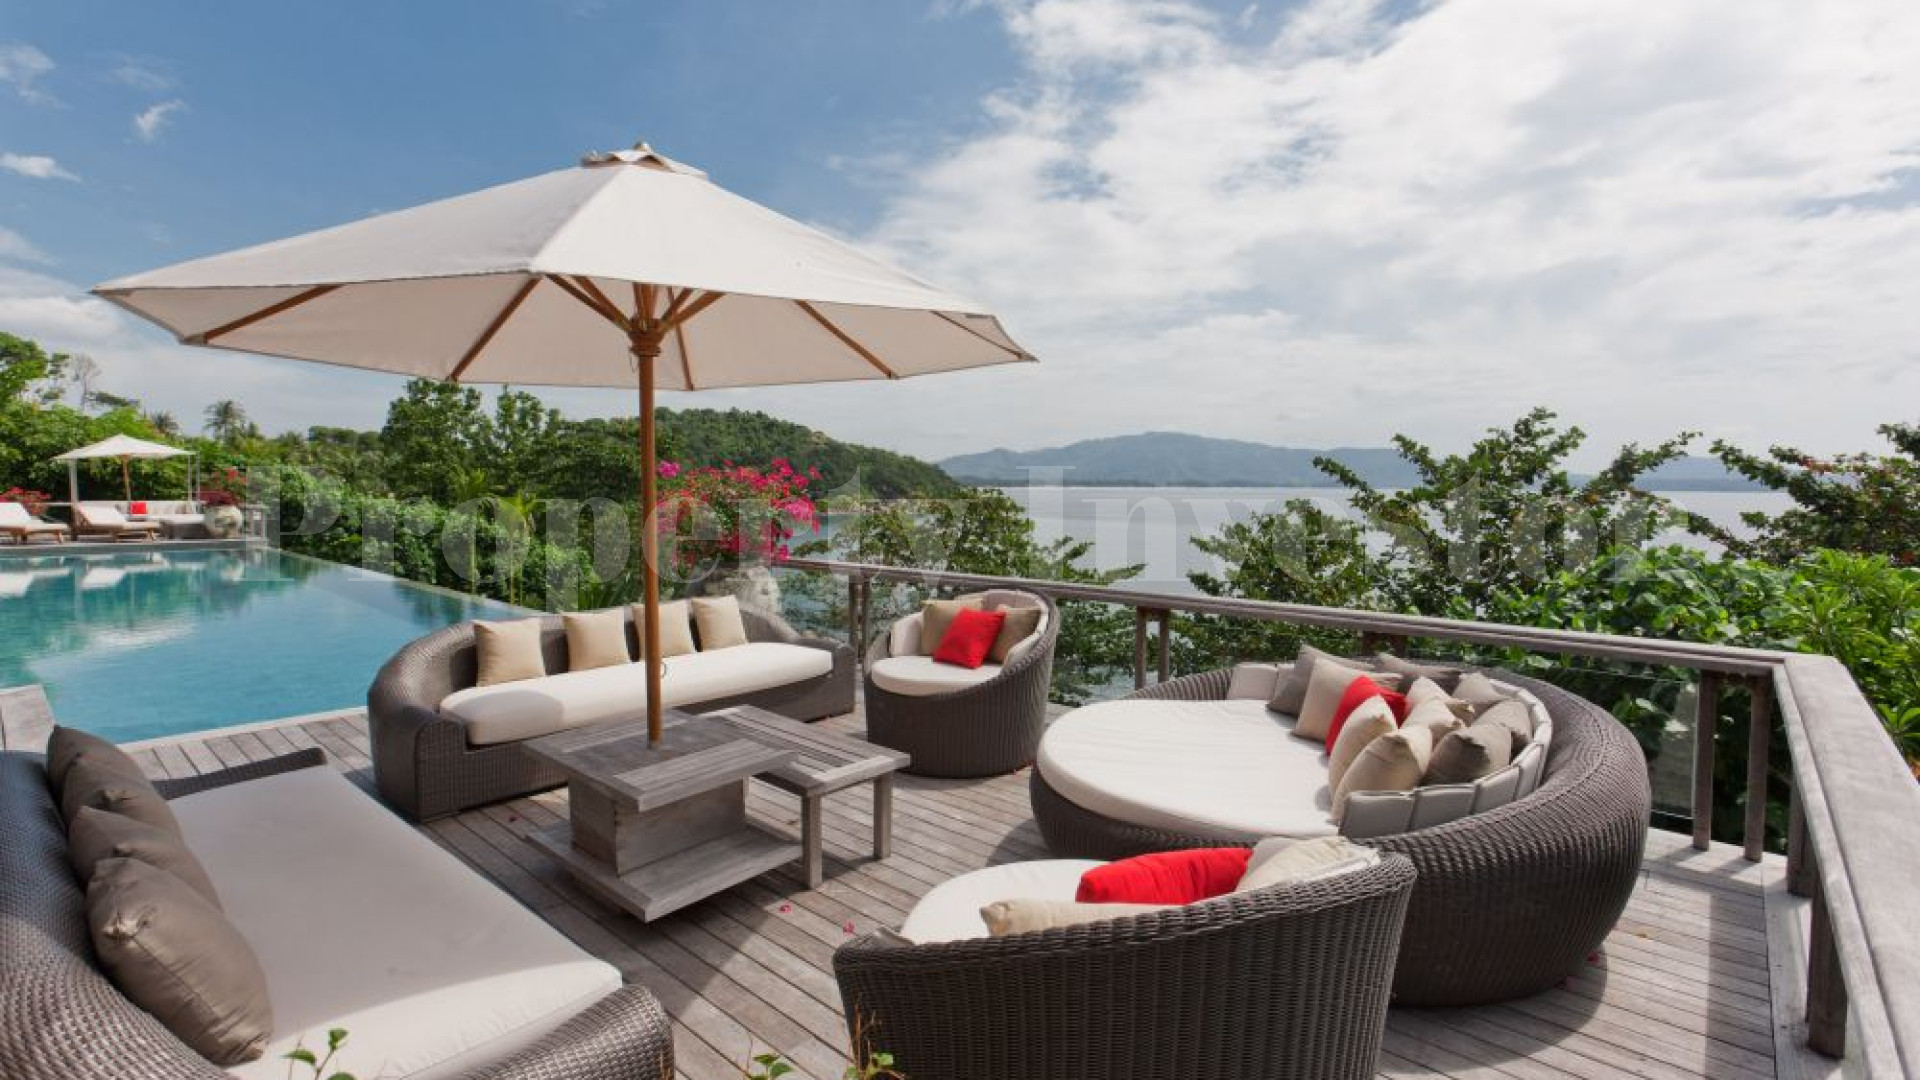 Fabulously Unique 6 Bedroom Oceanview Luxury Villa with 180° Panoramic Views & Private Beach for Sale in a 5* World Class Resort in Phuket